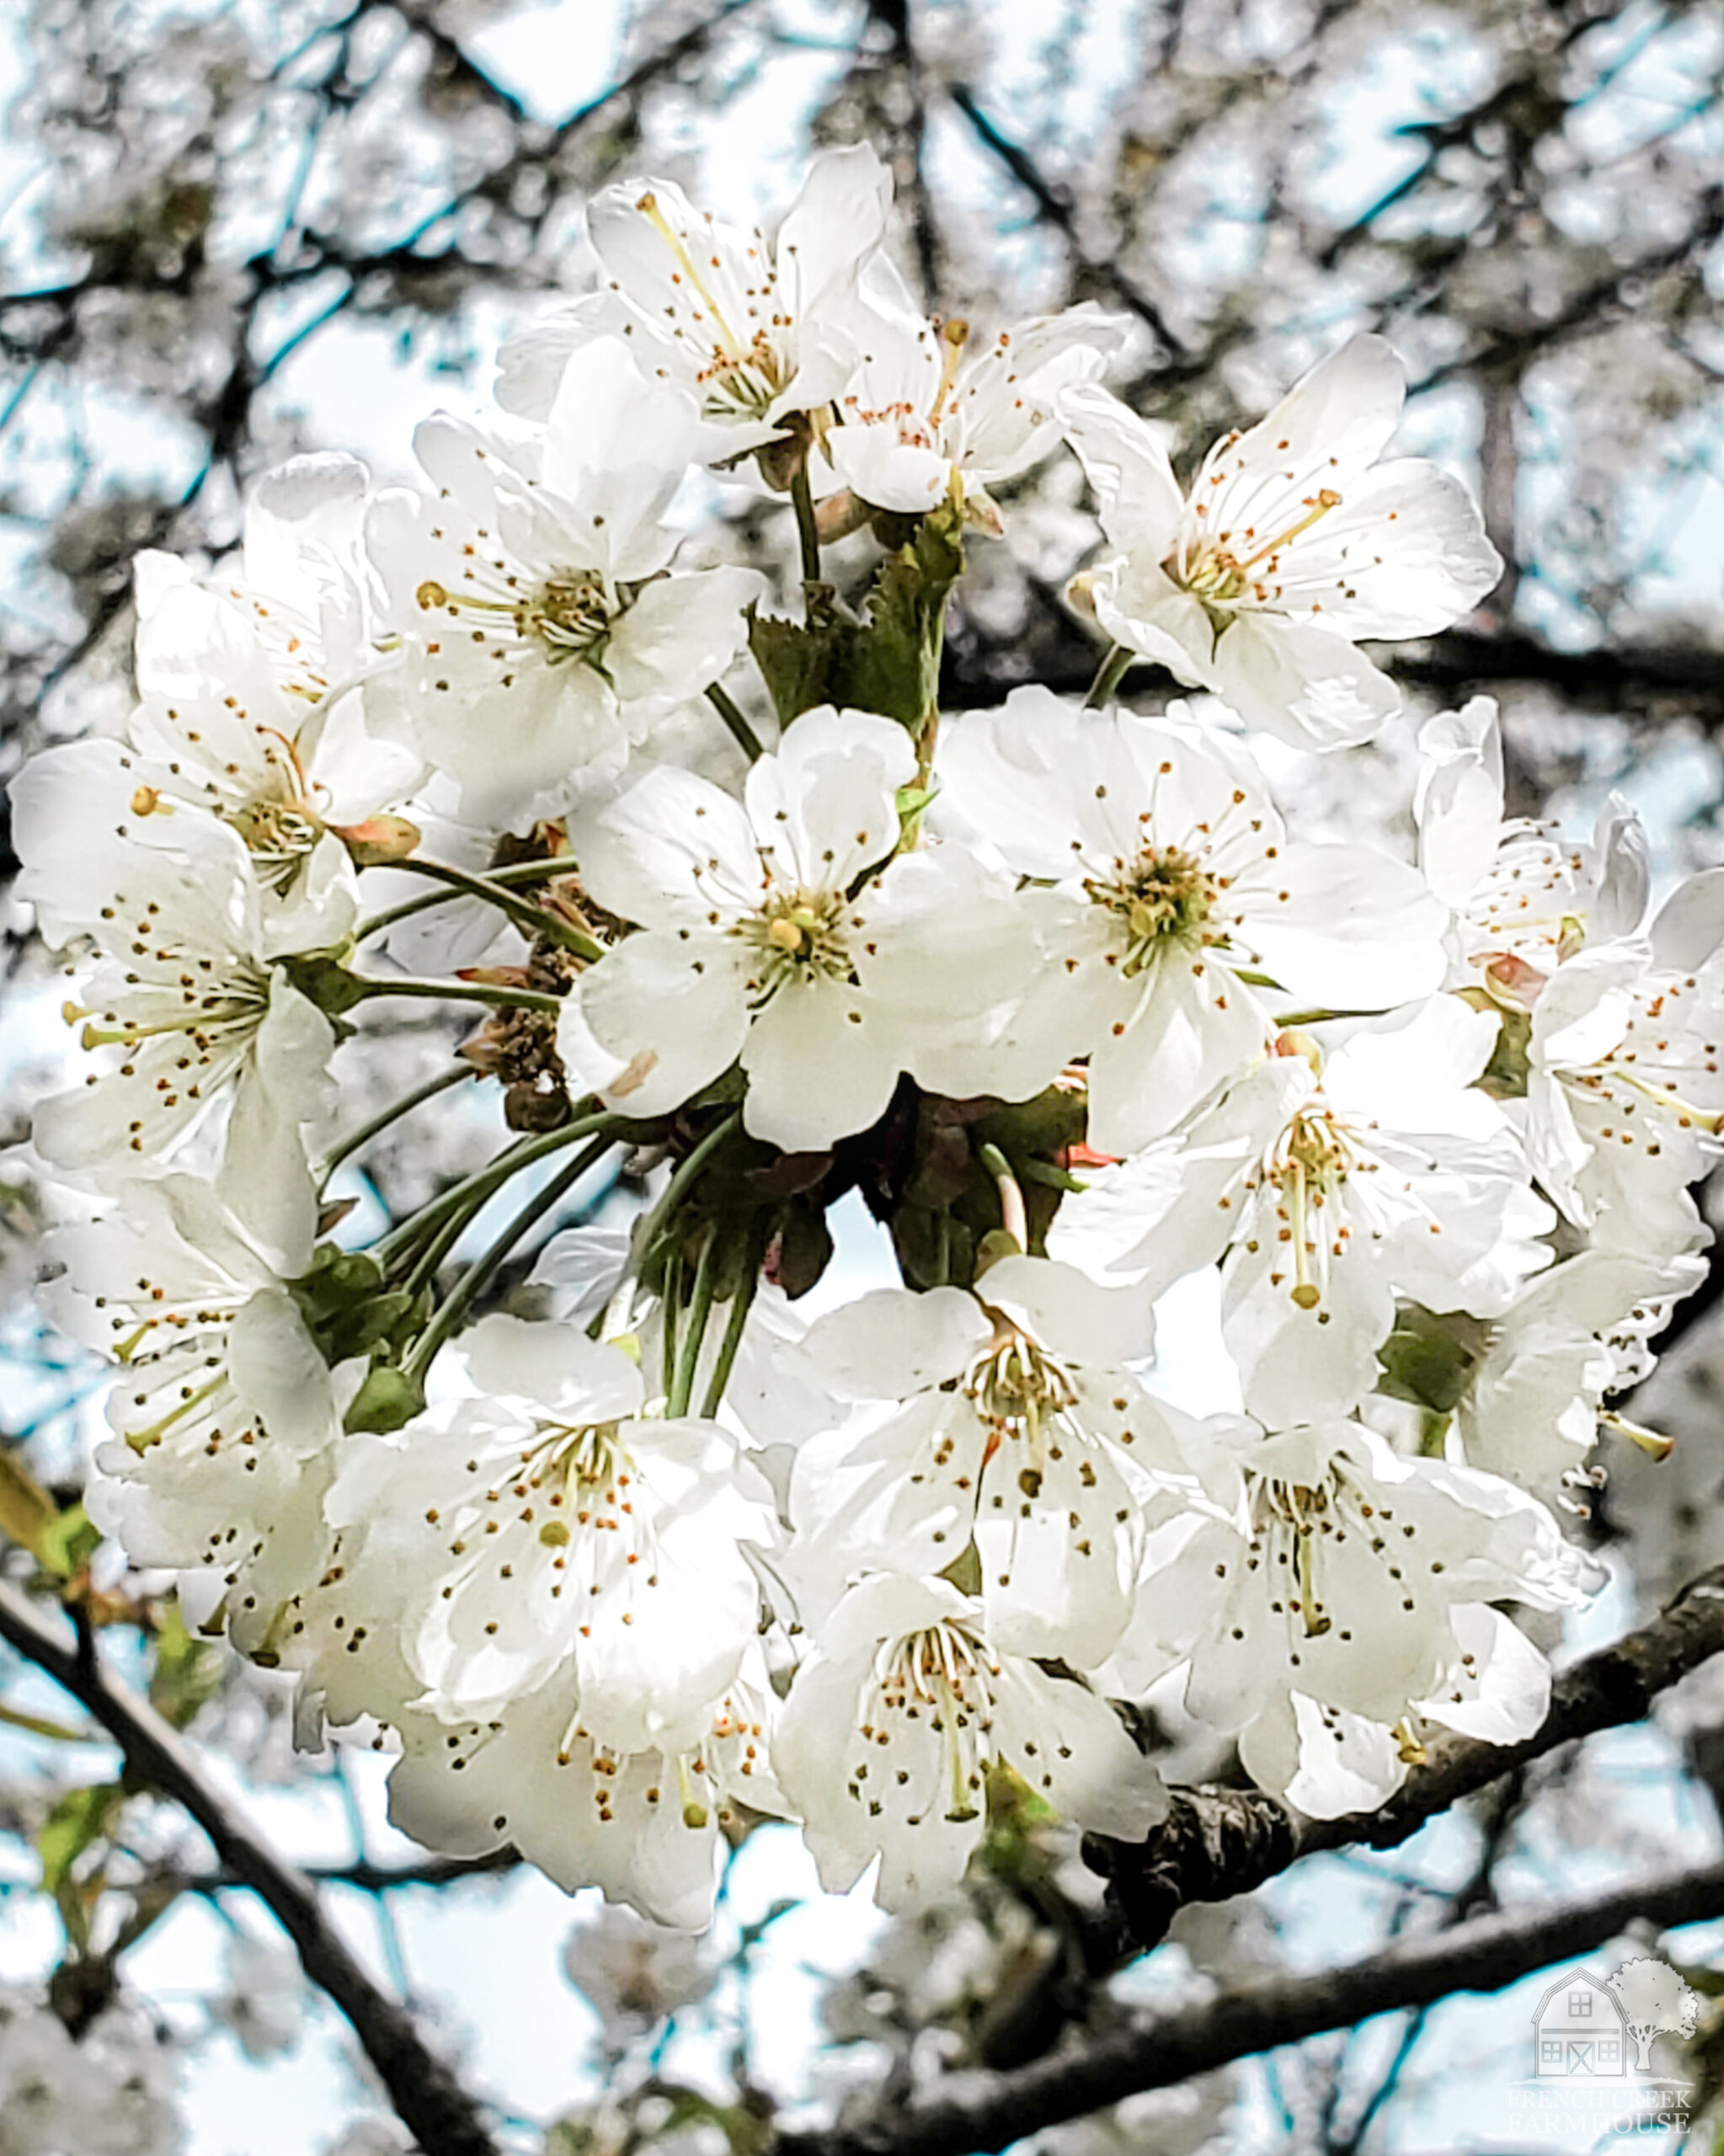 Cherry blossoms abound this month